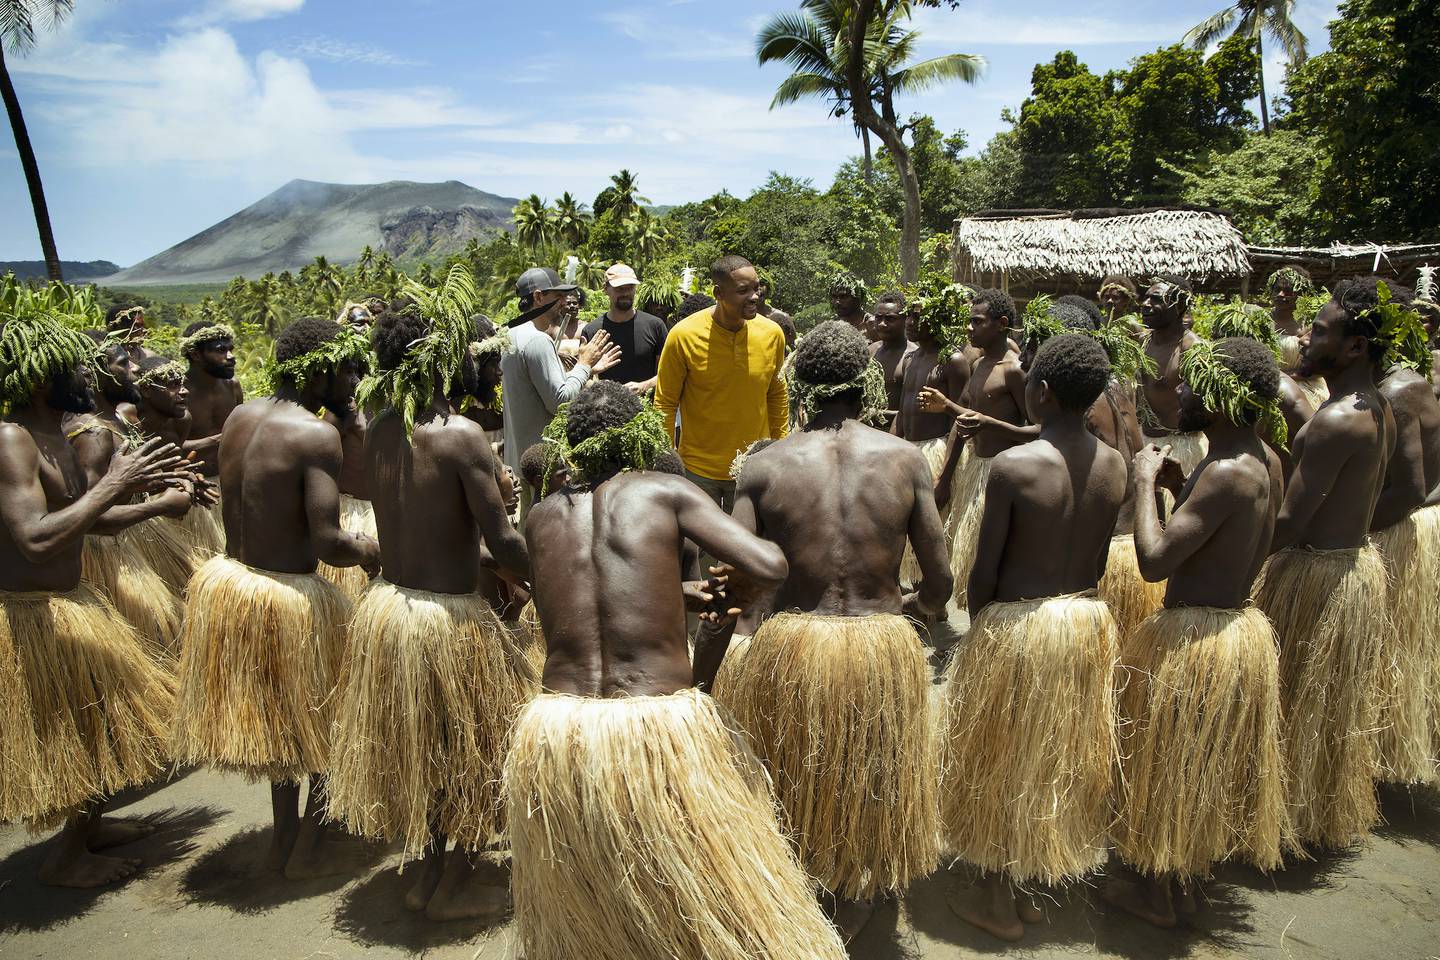 Will Smith, centre, in a scene from the National Geographic nature series 'Welcome to Earth'. Photo: Disney+ via AP